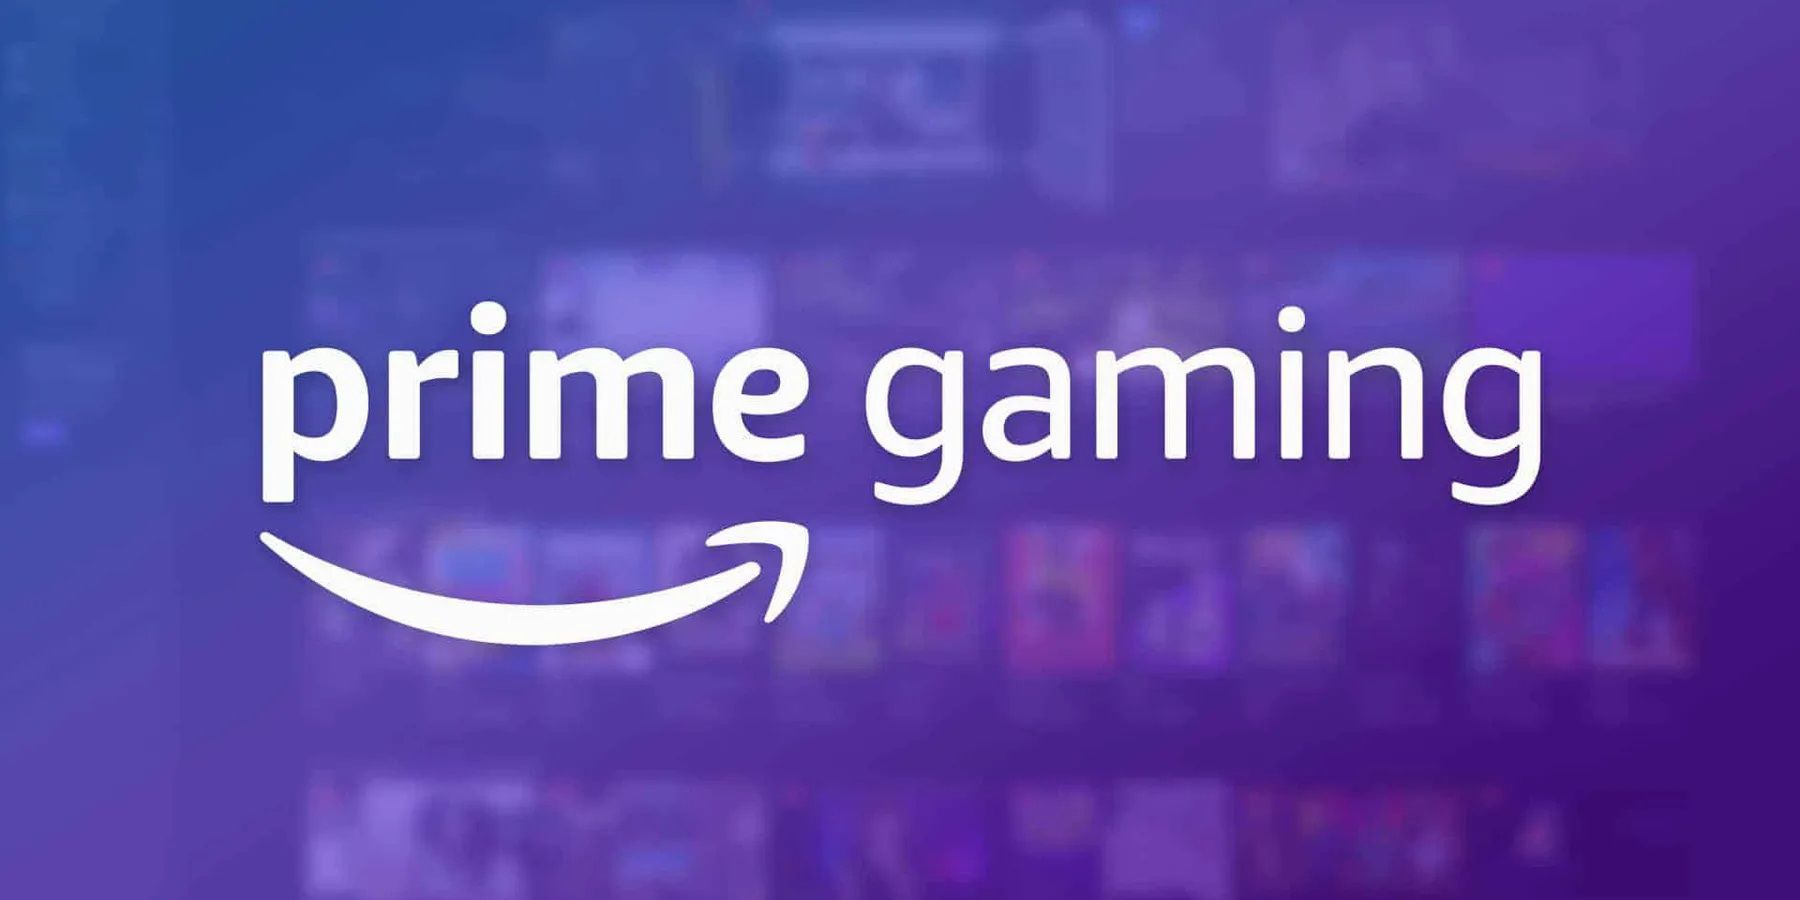 Prime Gaming is Giving FREE GAMES To Prime Members This August 2022!